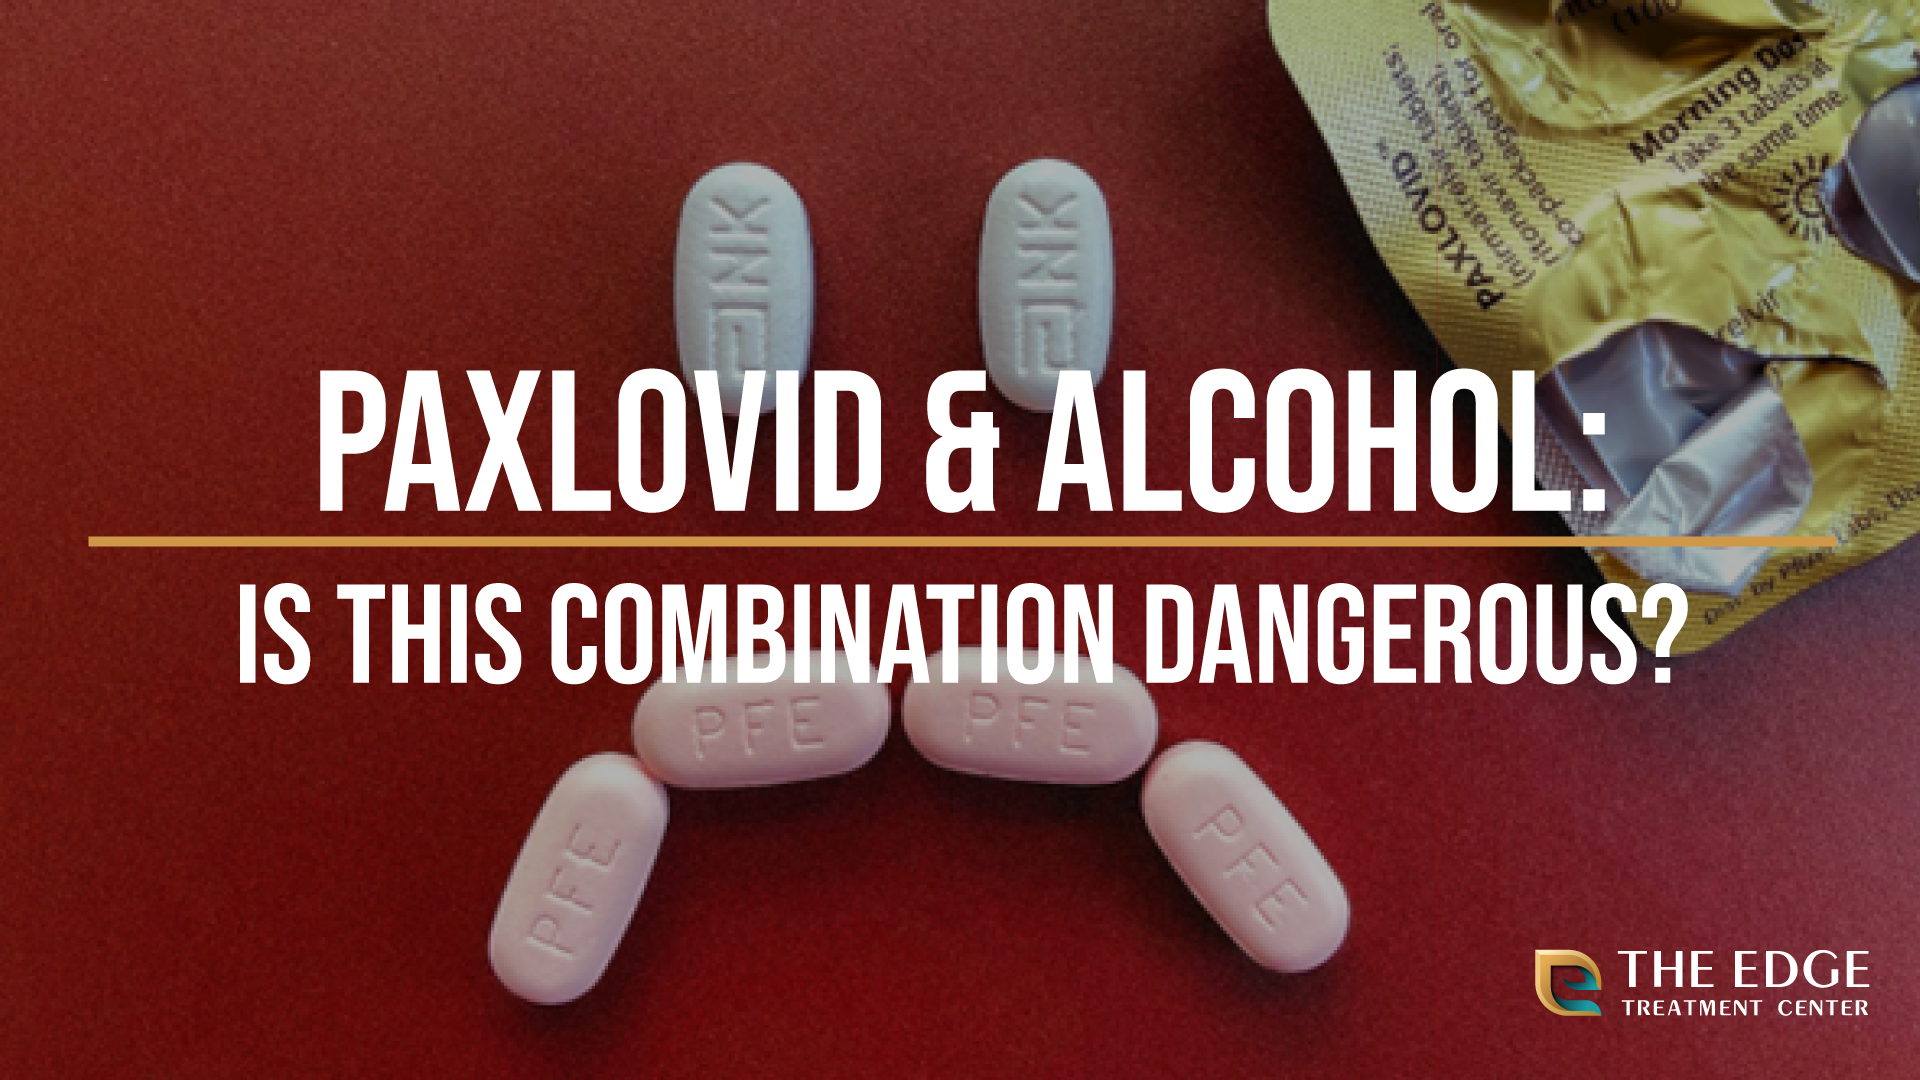 3 Medications That May Help Treat Unhealthy Alcohol Use